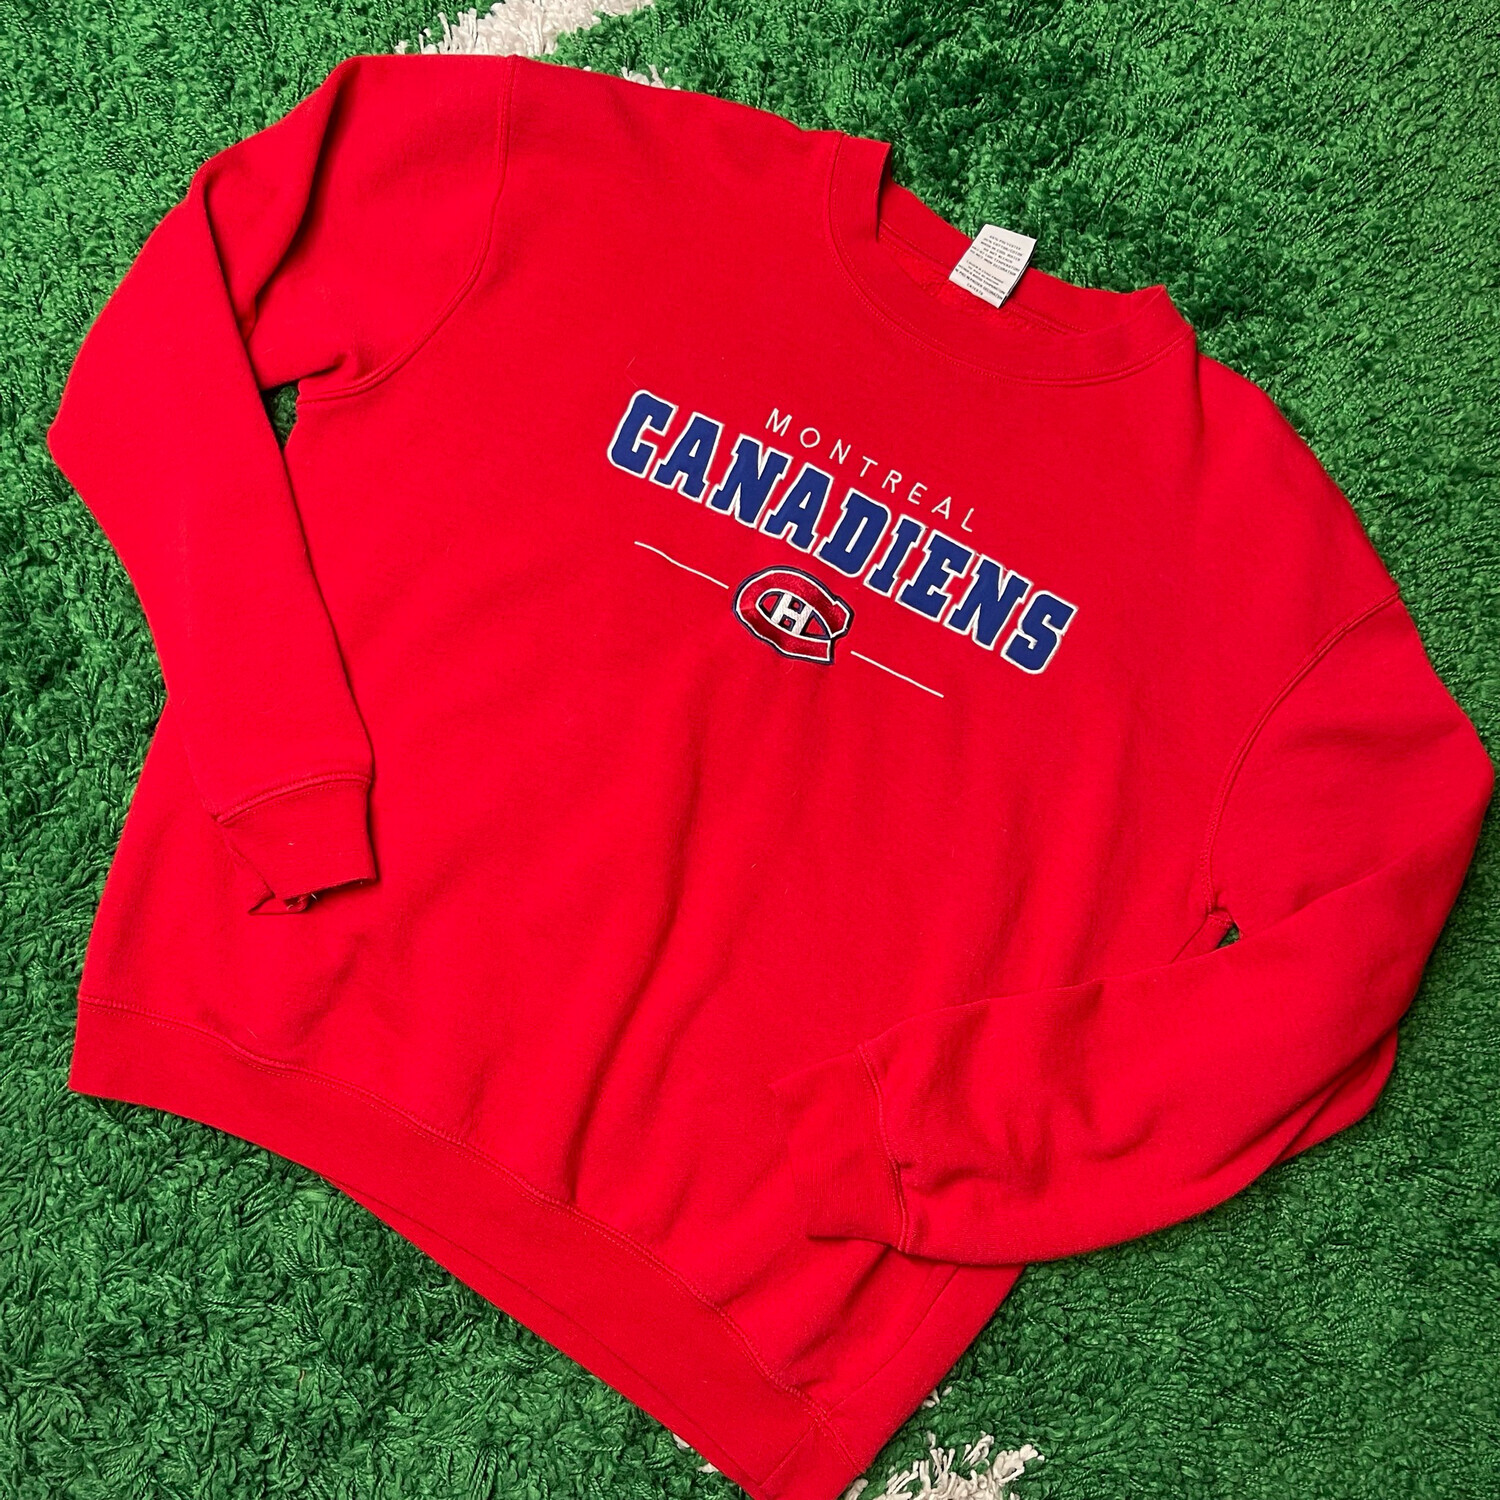 Montreal Canadiens Red Embroidered Crewneck Sweatshirt Size Large